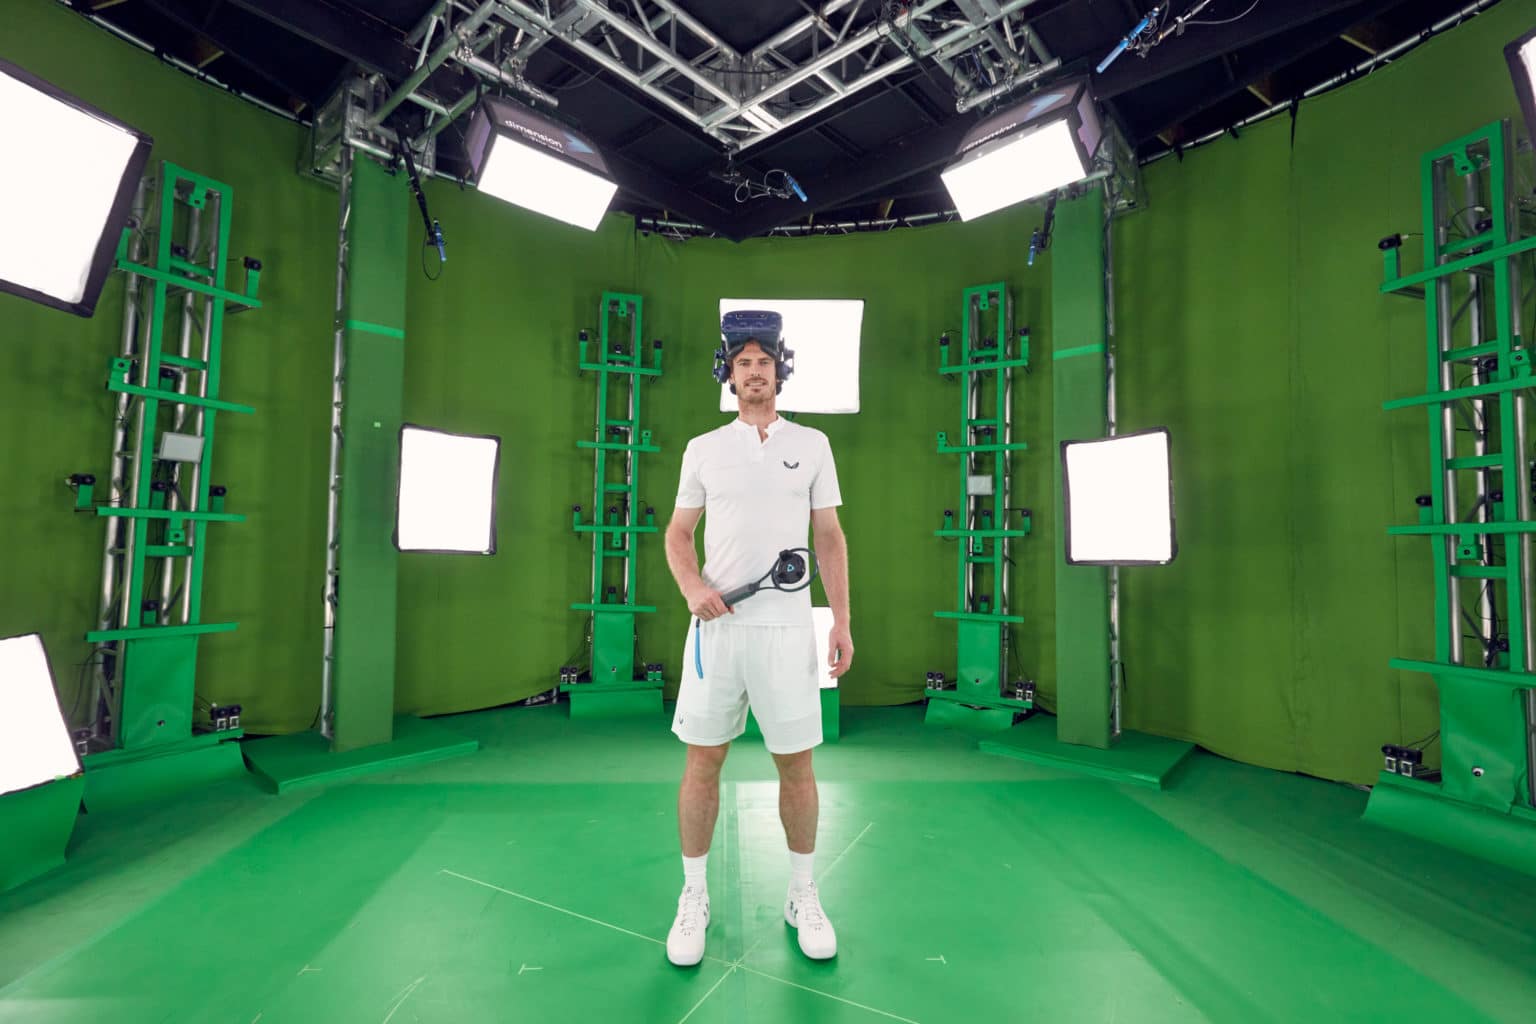 dimension microsoft mixed reality partner, andy murray